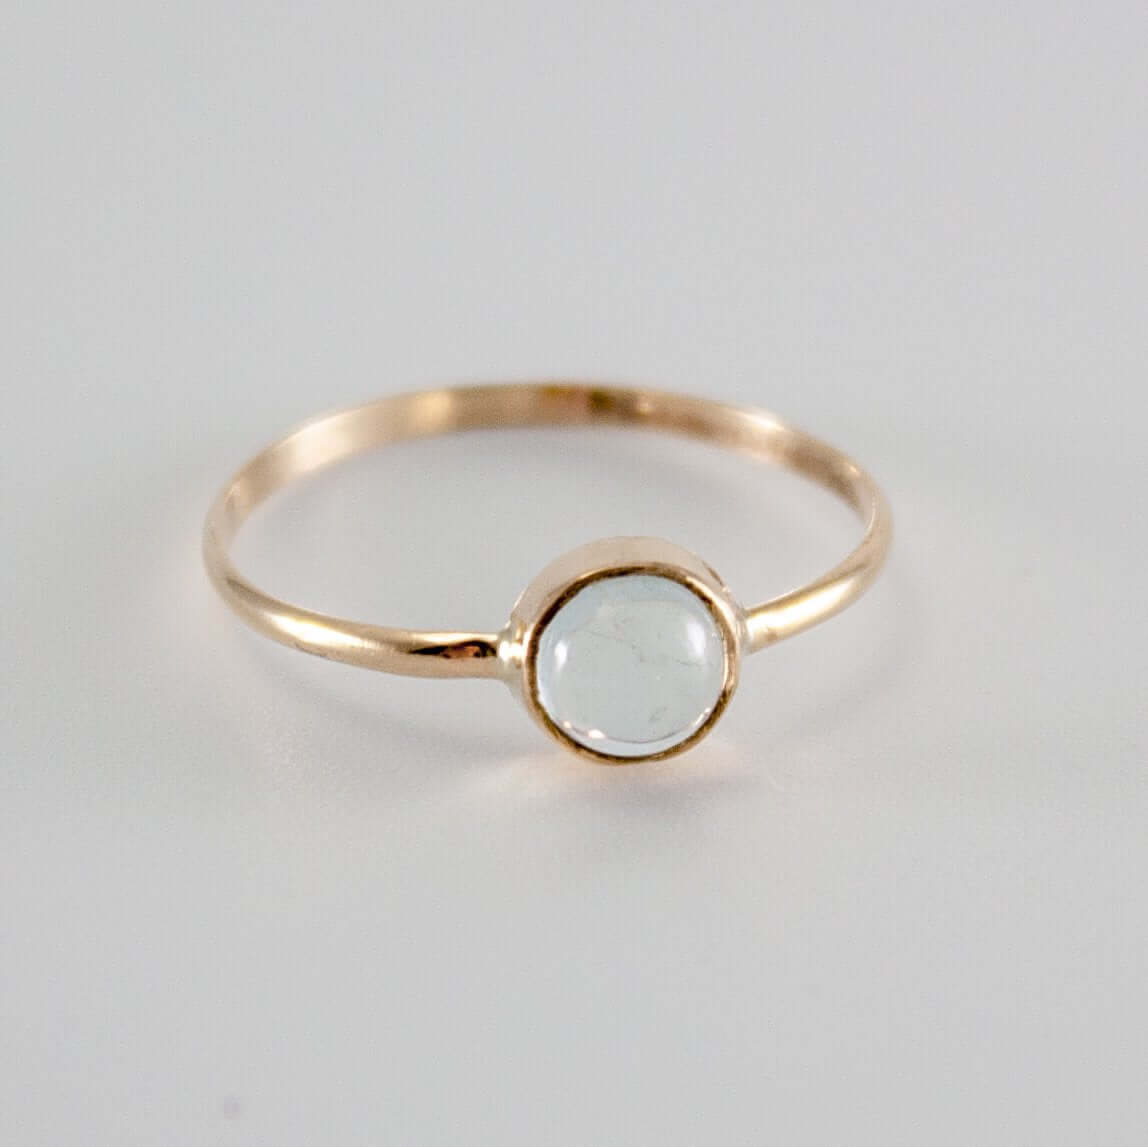 Simple and ultra minimalist round ring in 18k Gold